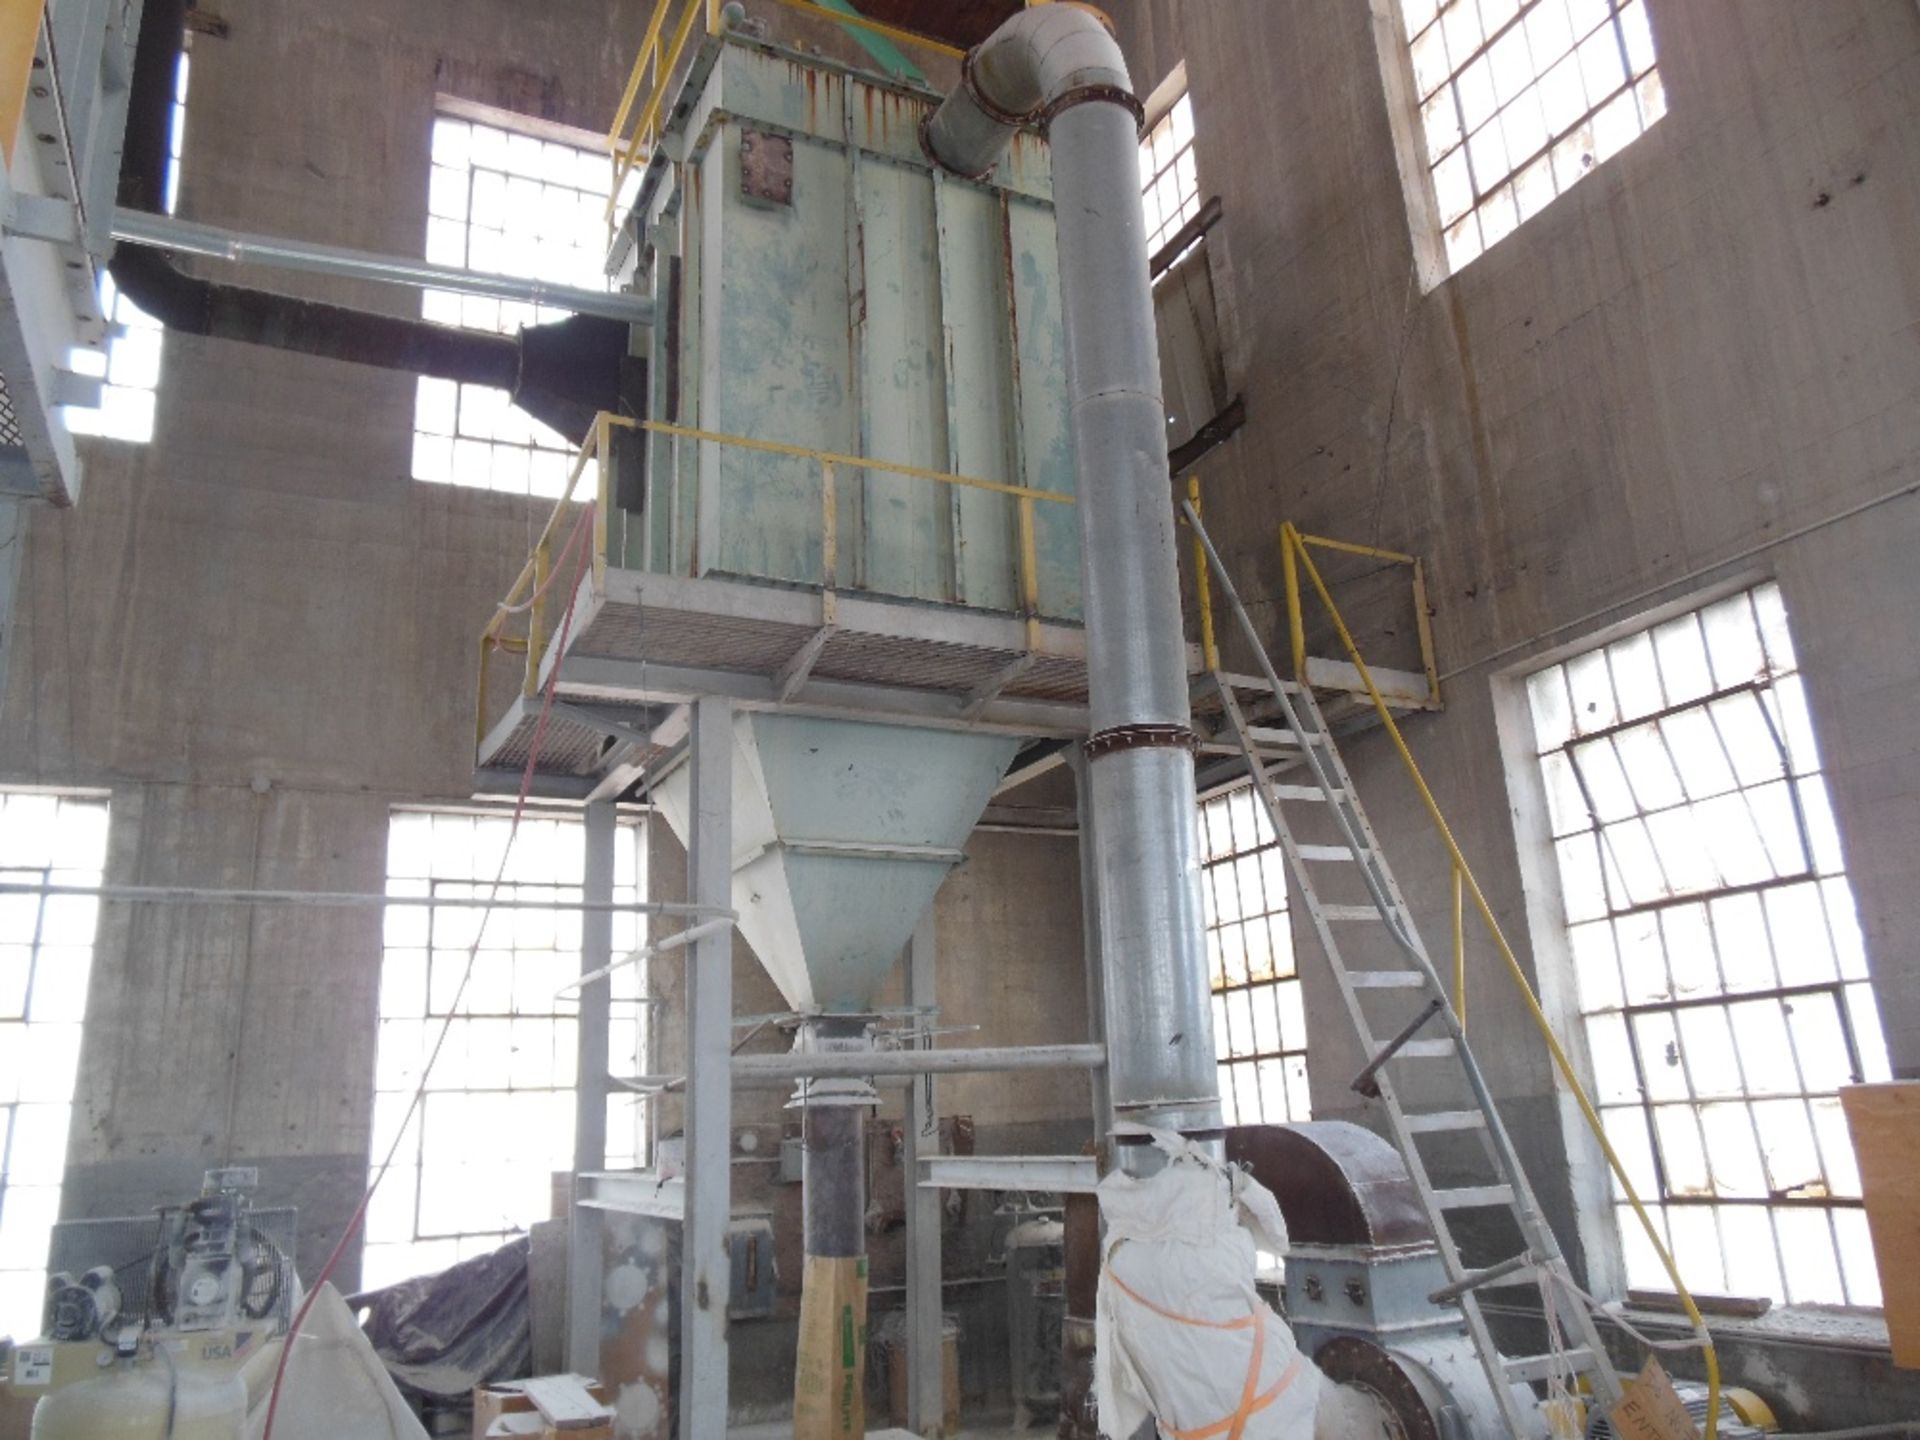 Amano dust collector, model # WRT-5096; rated 10,000 cfm; pulse jet cleaning system; 30Hp premium